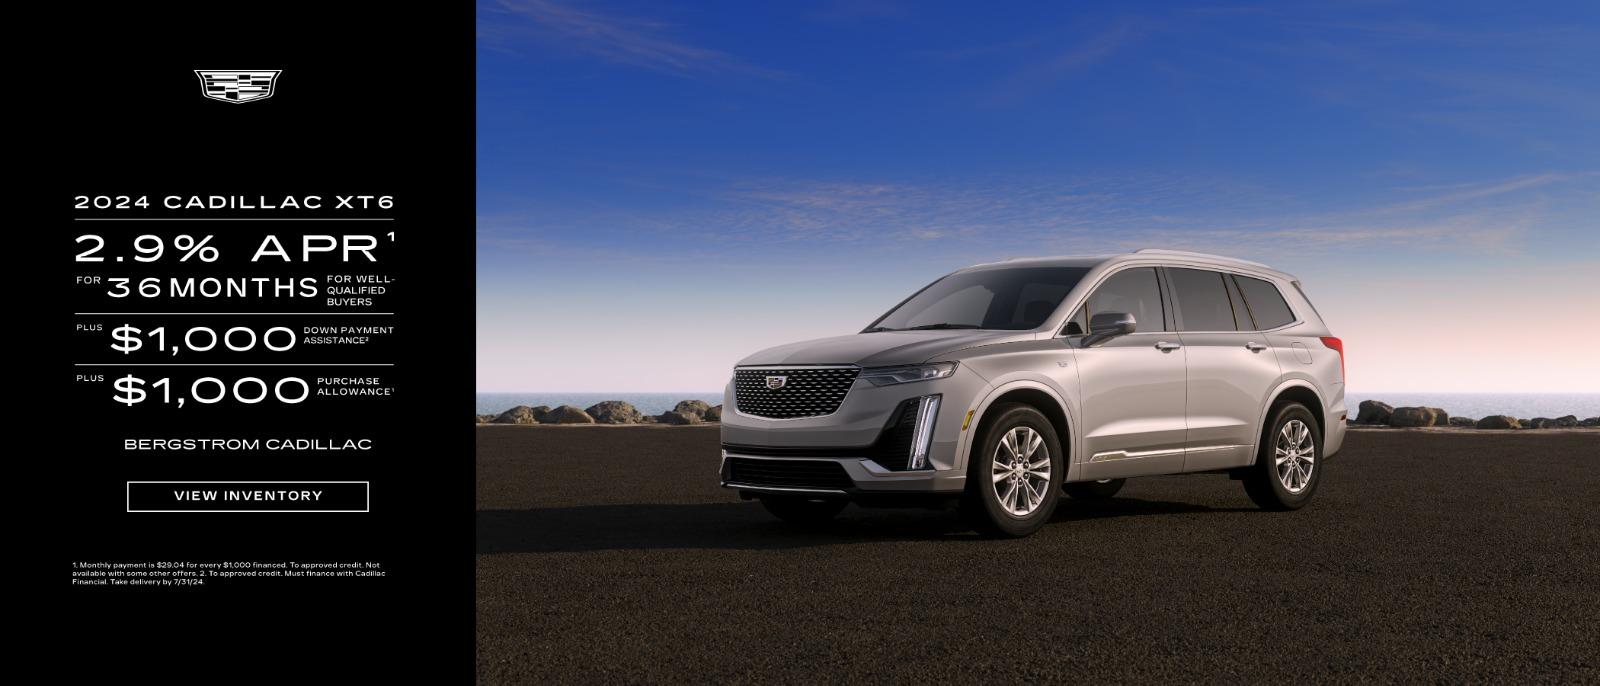 2024 Cadillac XT6 2.9% APR for 36months plus $1,000 purchase allowance